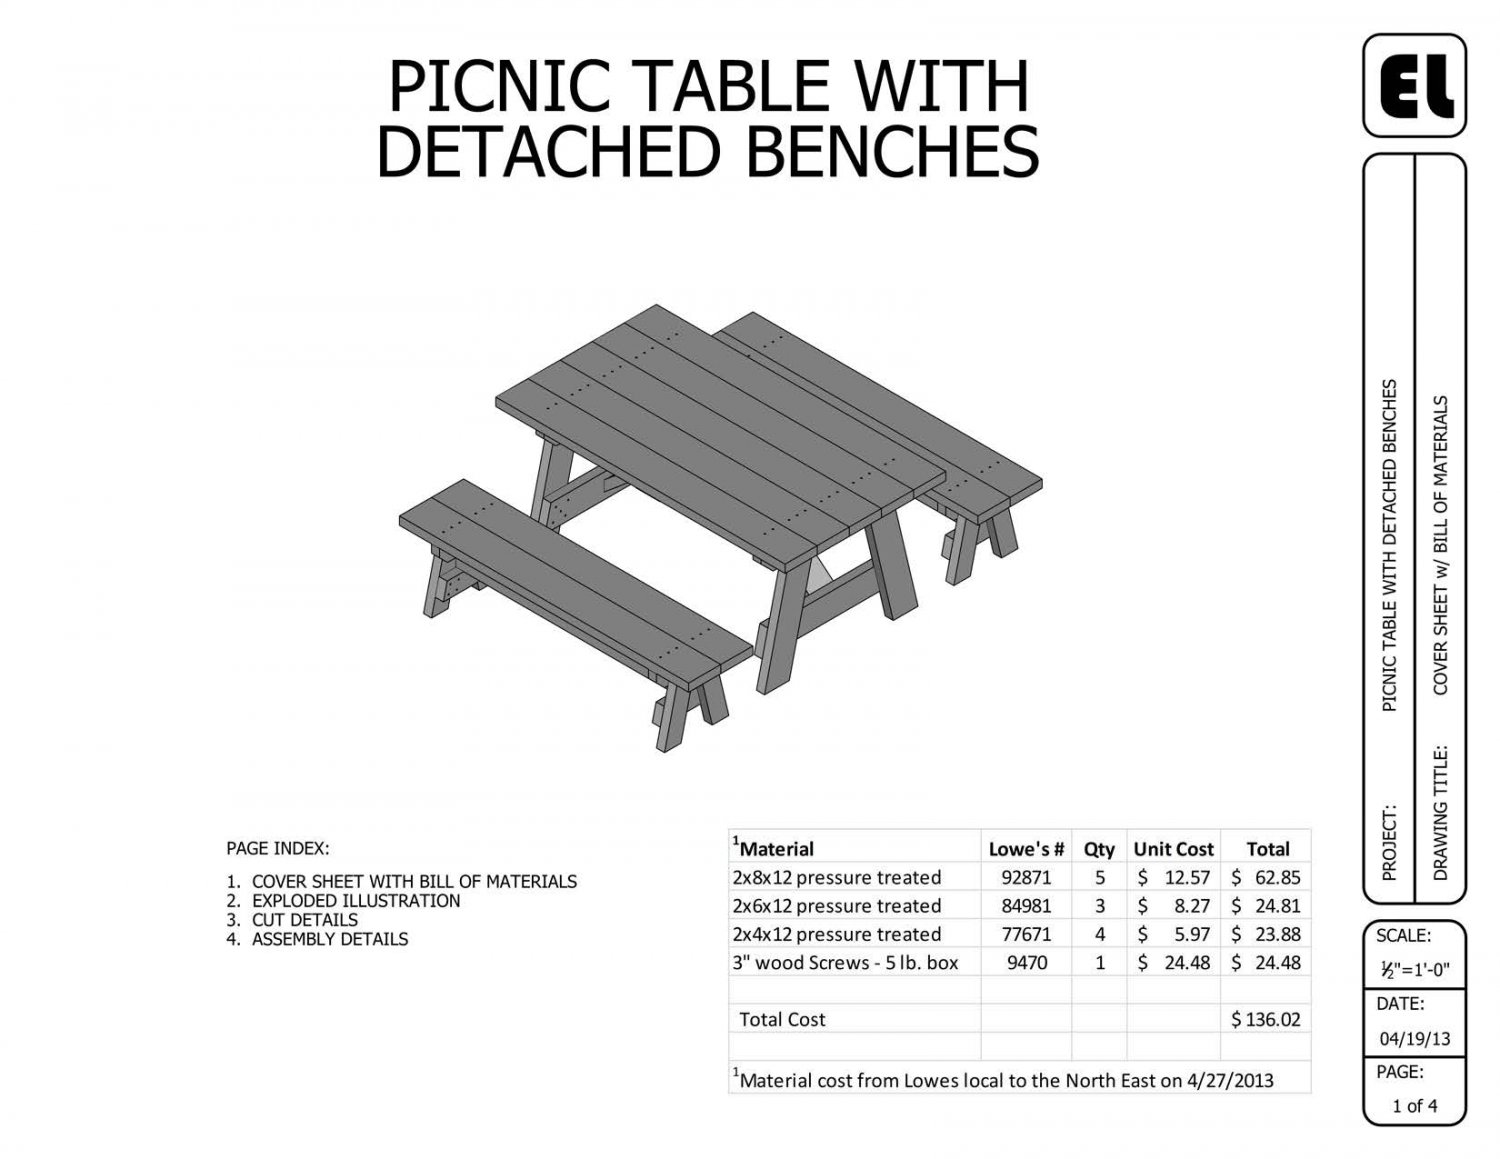 6' Picnic Table and Benches Building Plans Blueprints DIY 